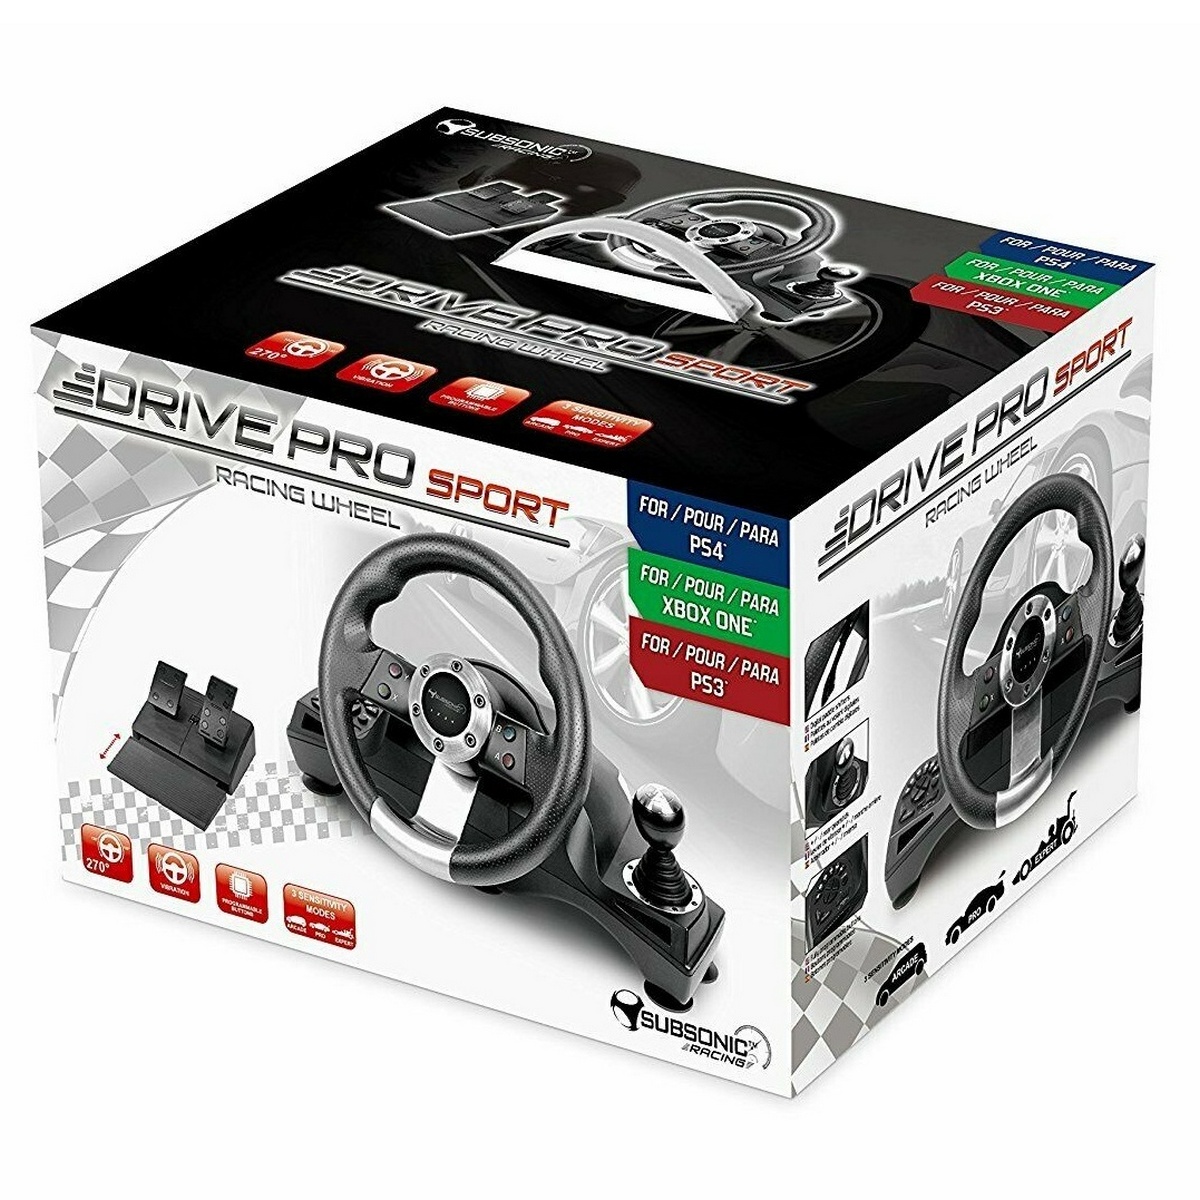 Subsonic Drive Pro Sport Wheel with Pedals and Gear Shift (PS4, PS3, Xbox One)